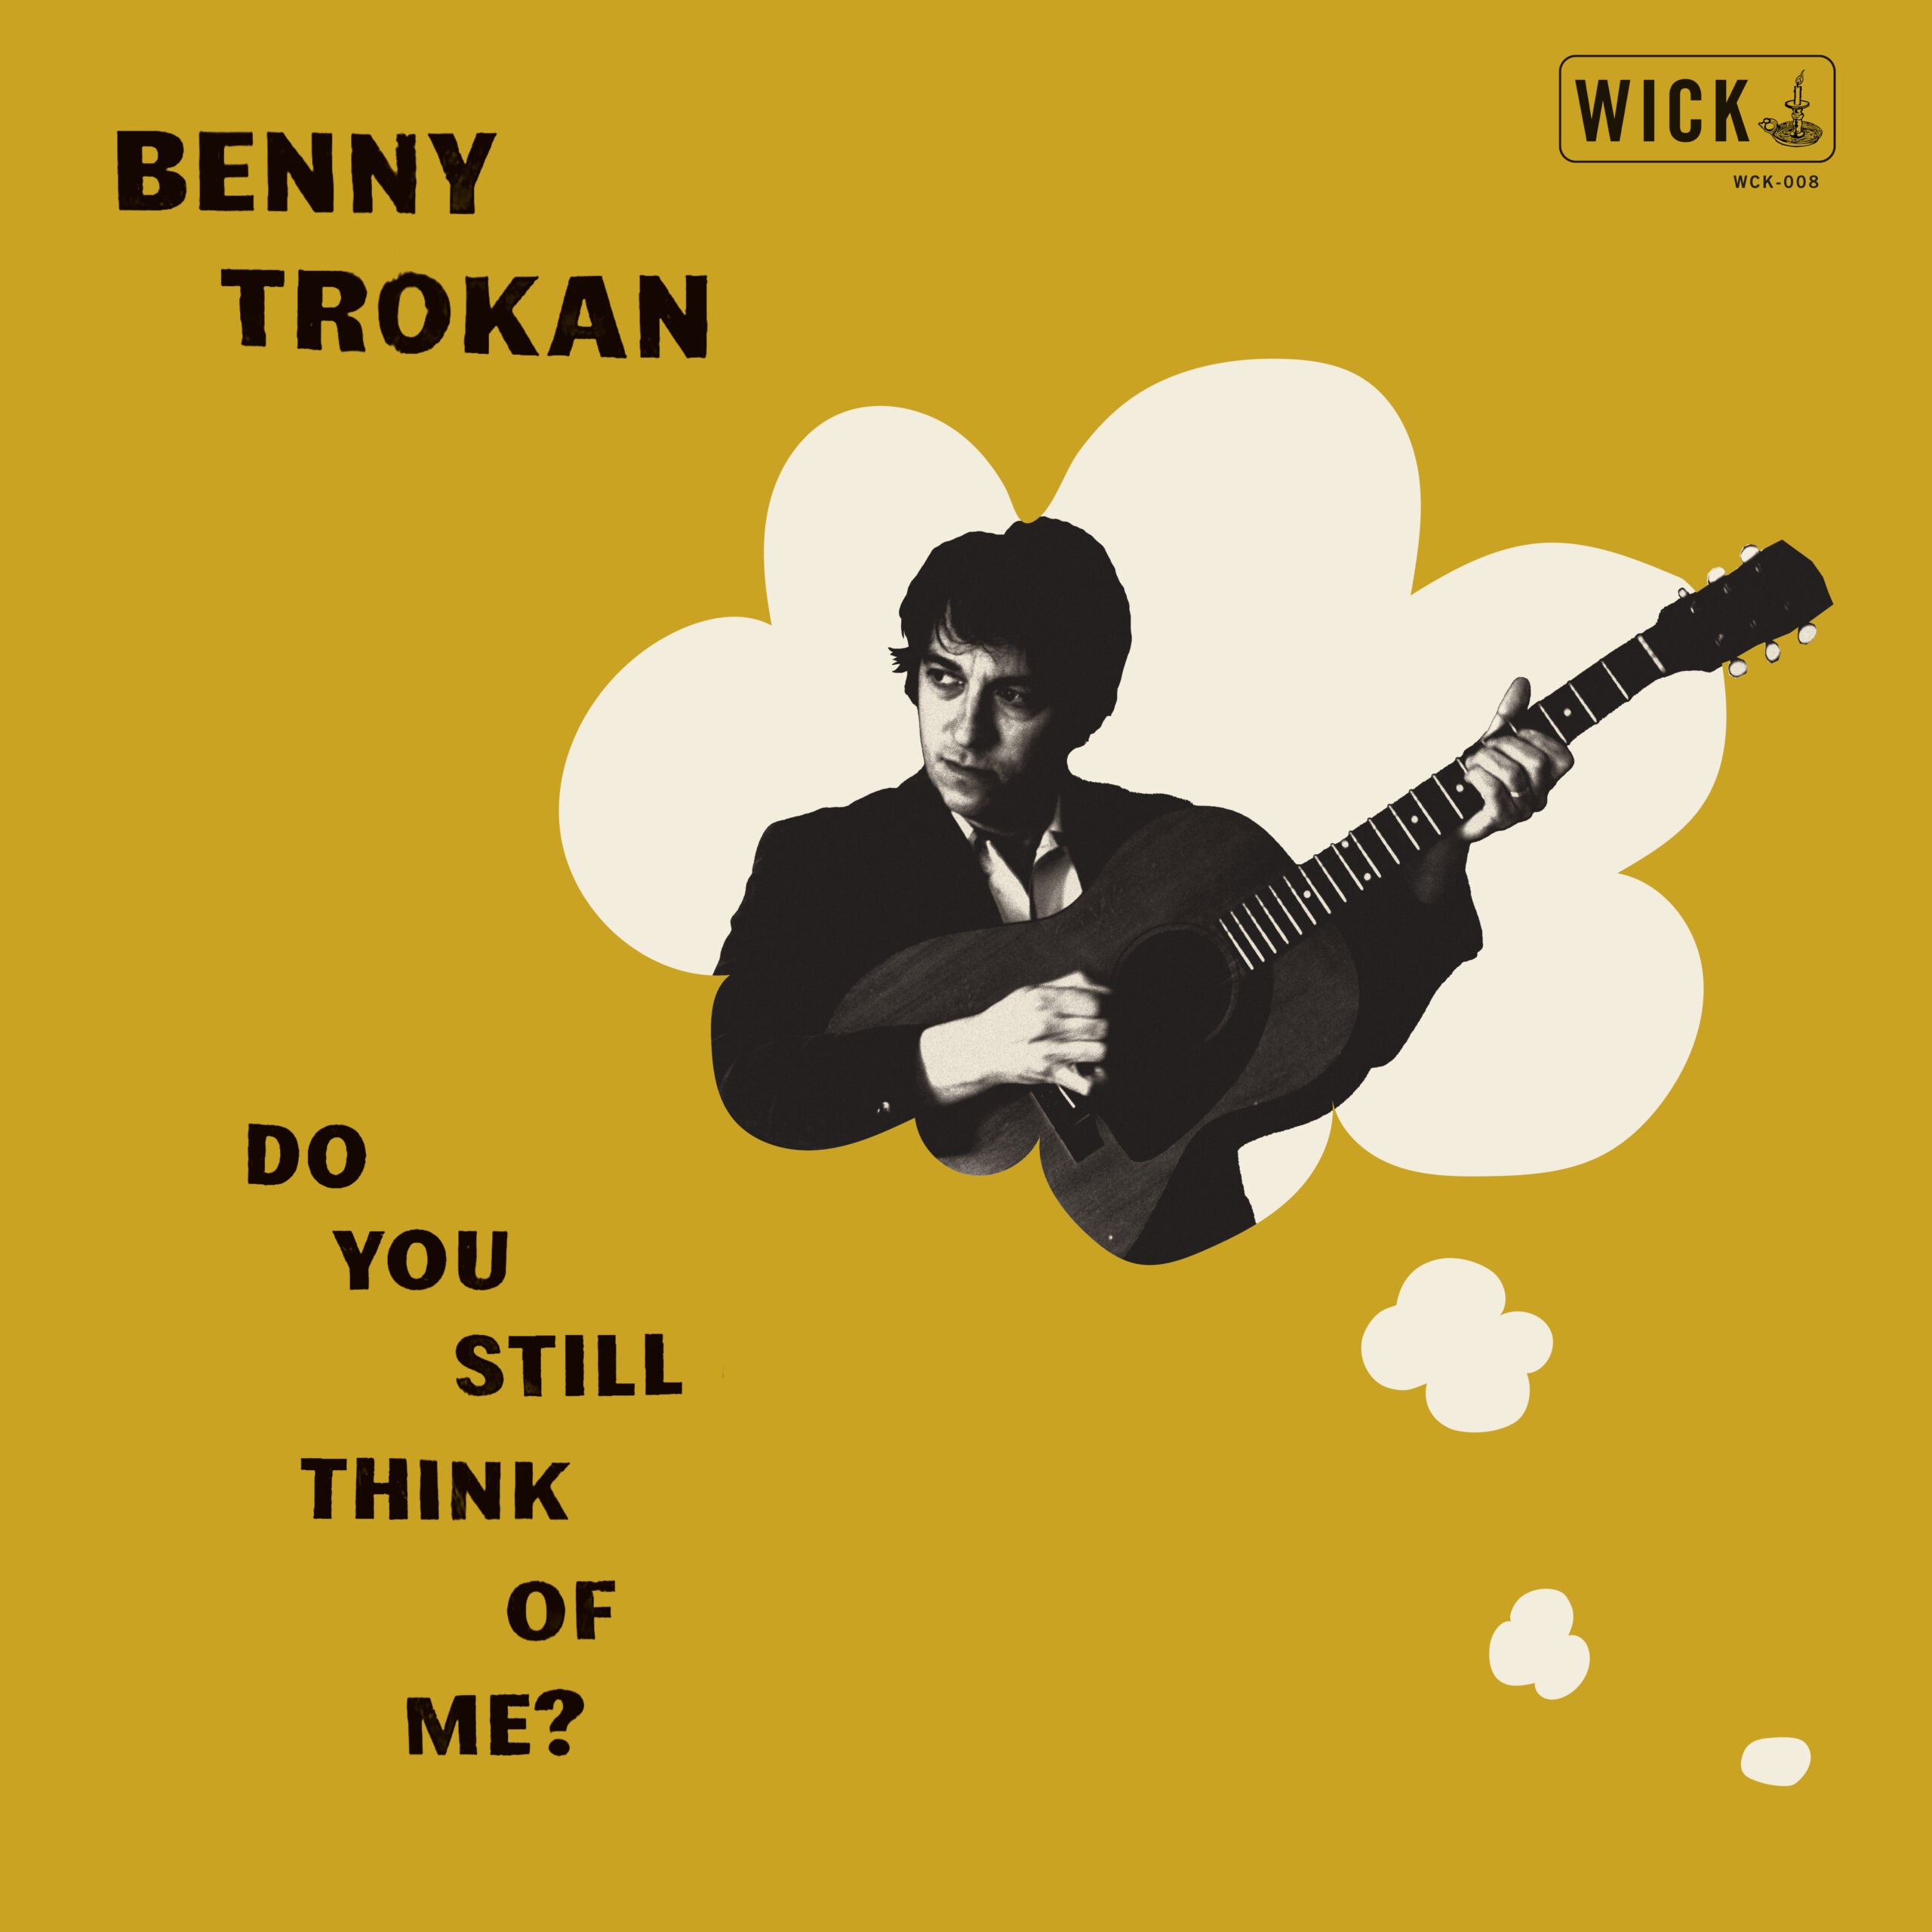 BENNY TROKAN - DO YOU STILL THINK OF ME (ED LIM DISQUAIRES INDES) - LP